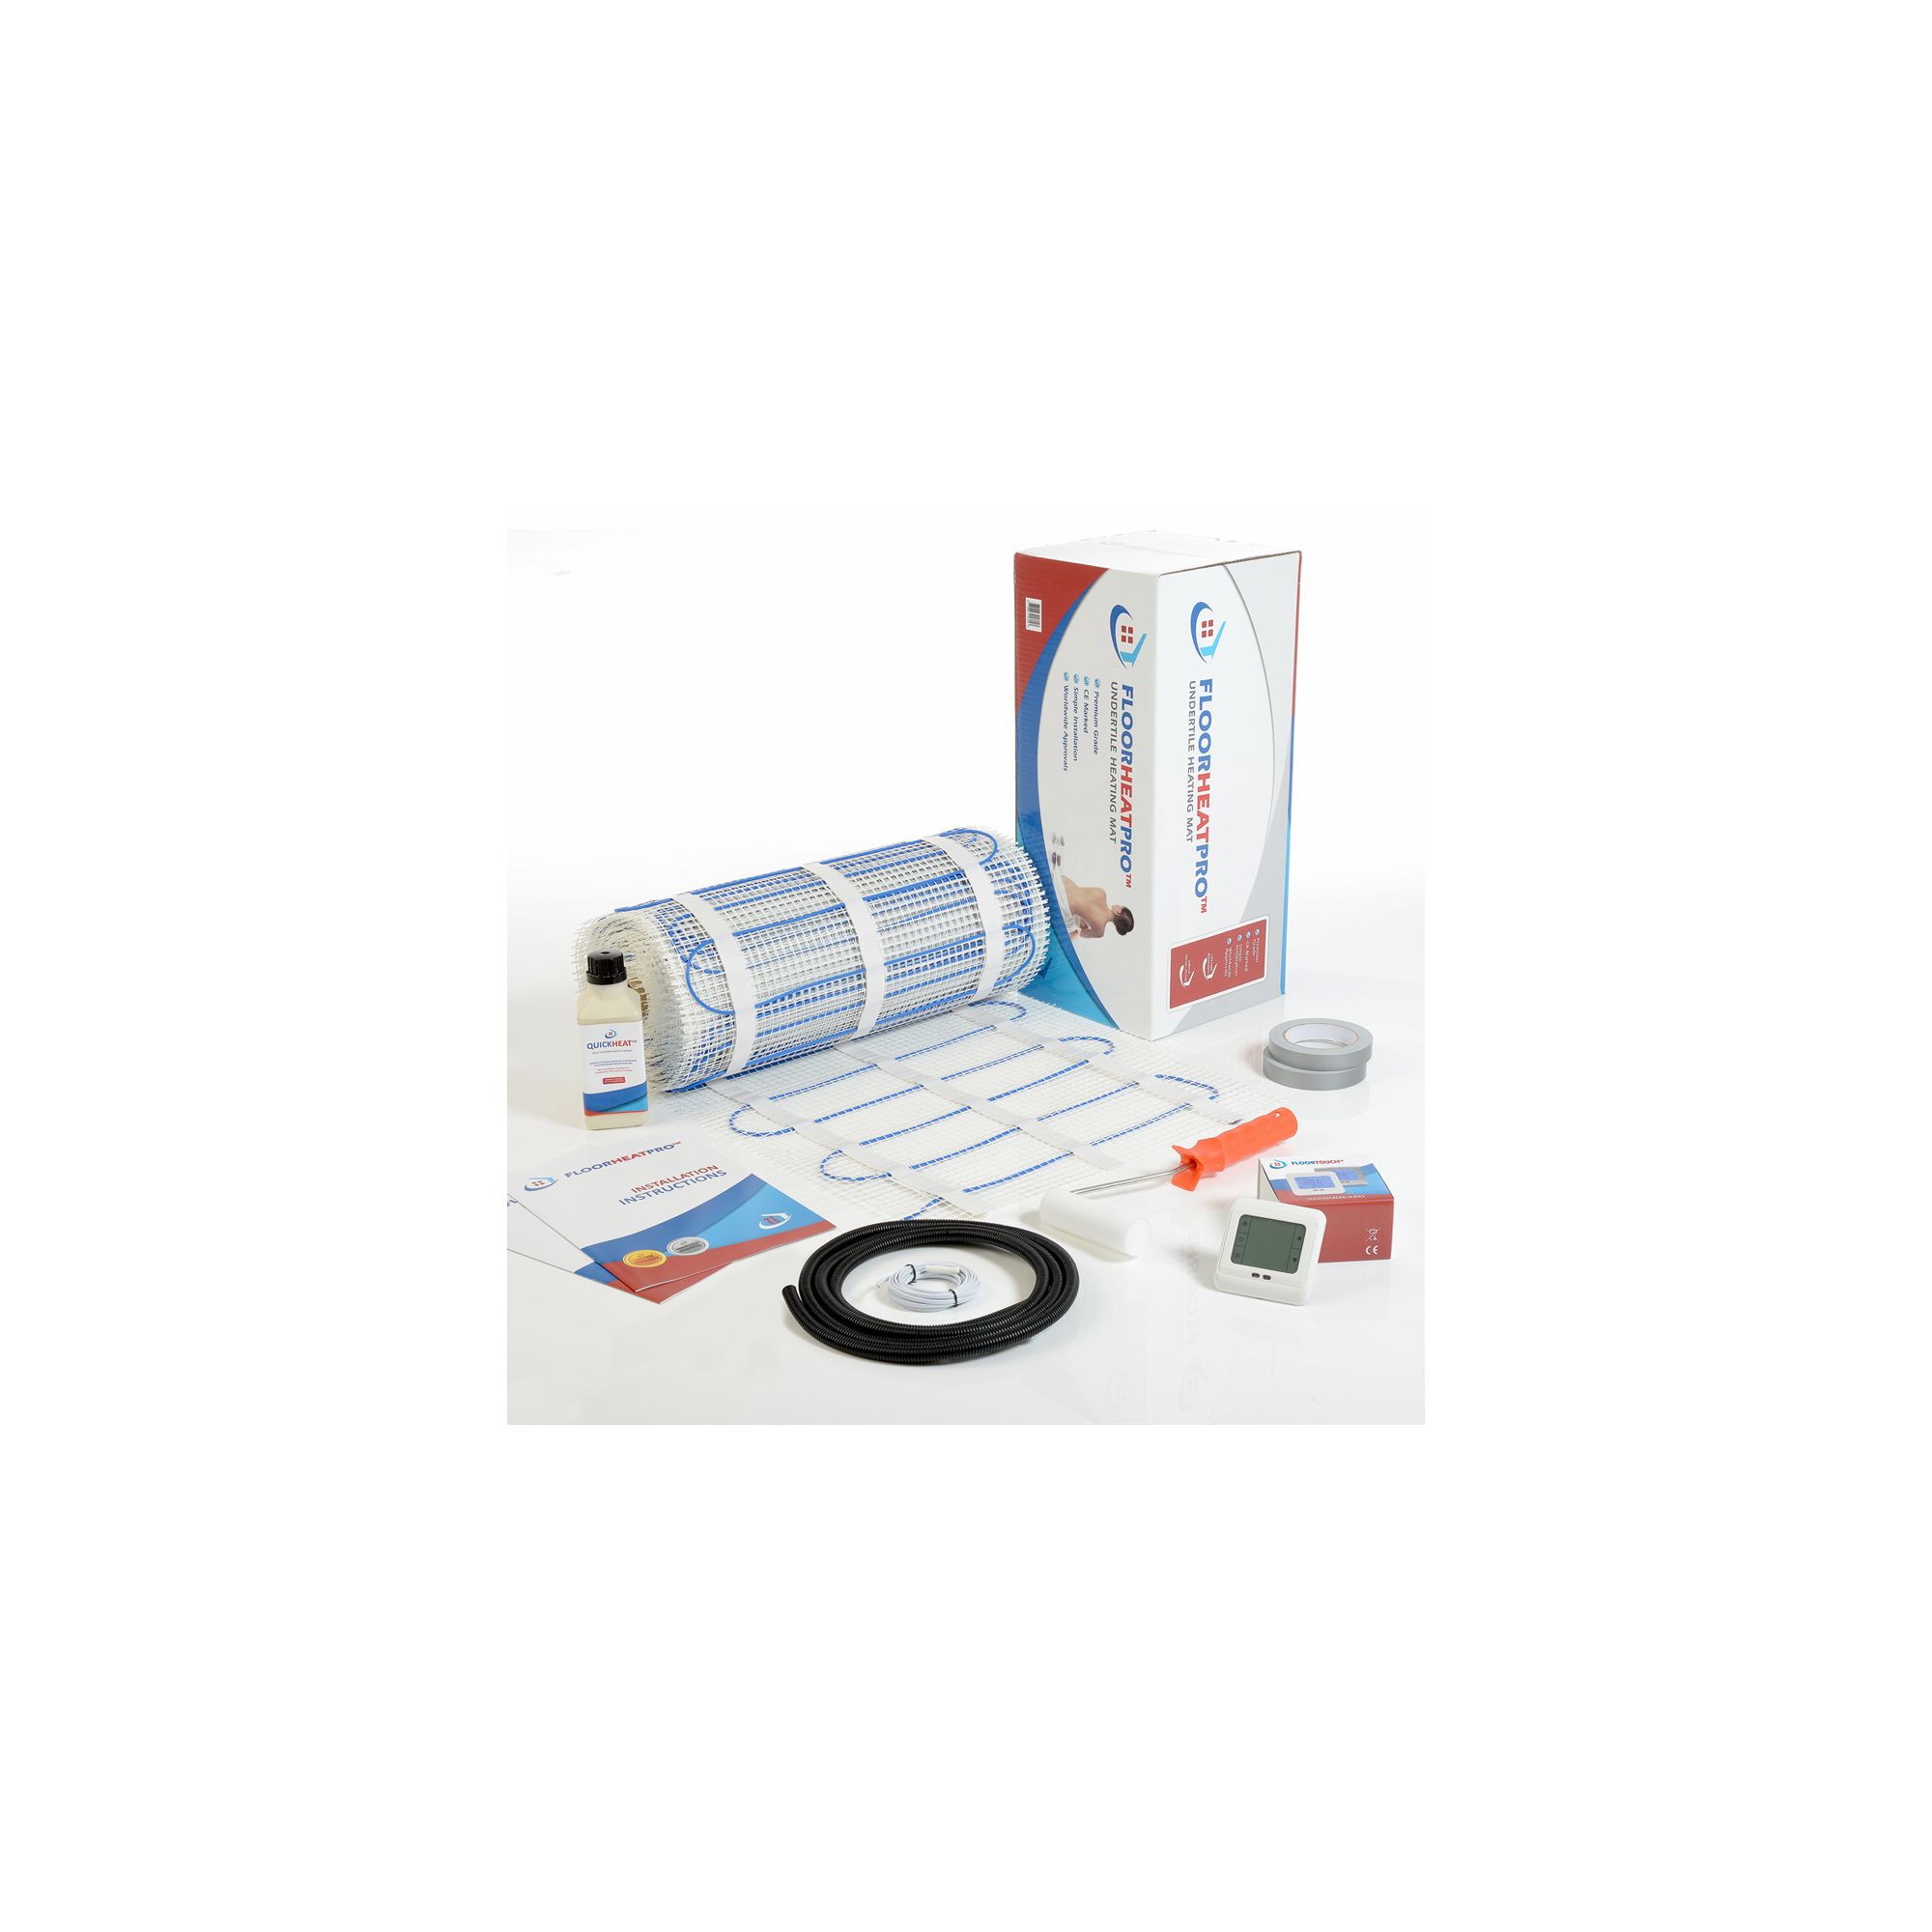 23.0m2 - Underfloor Electric Heating Kit 150w/m2 - Tiles at Tescos Direct